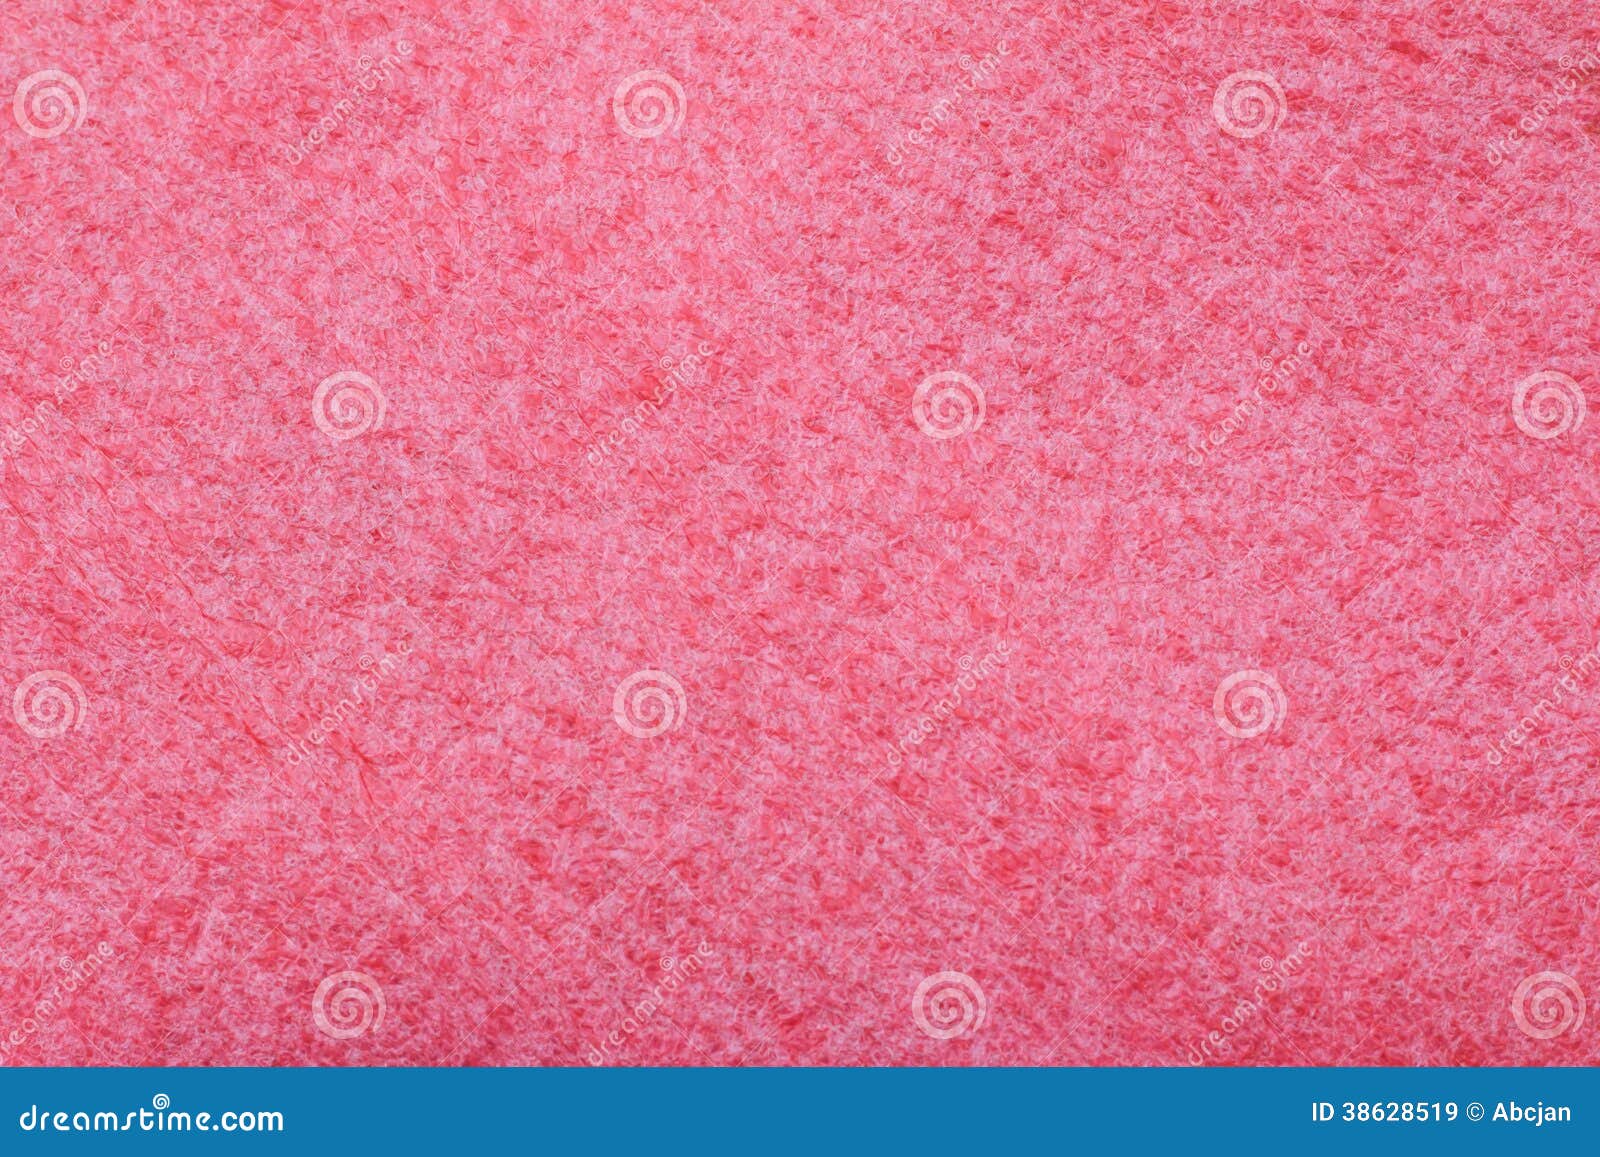 Texture of a porous pink sponge in close-up as an abstract